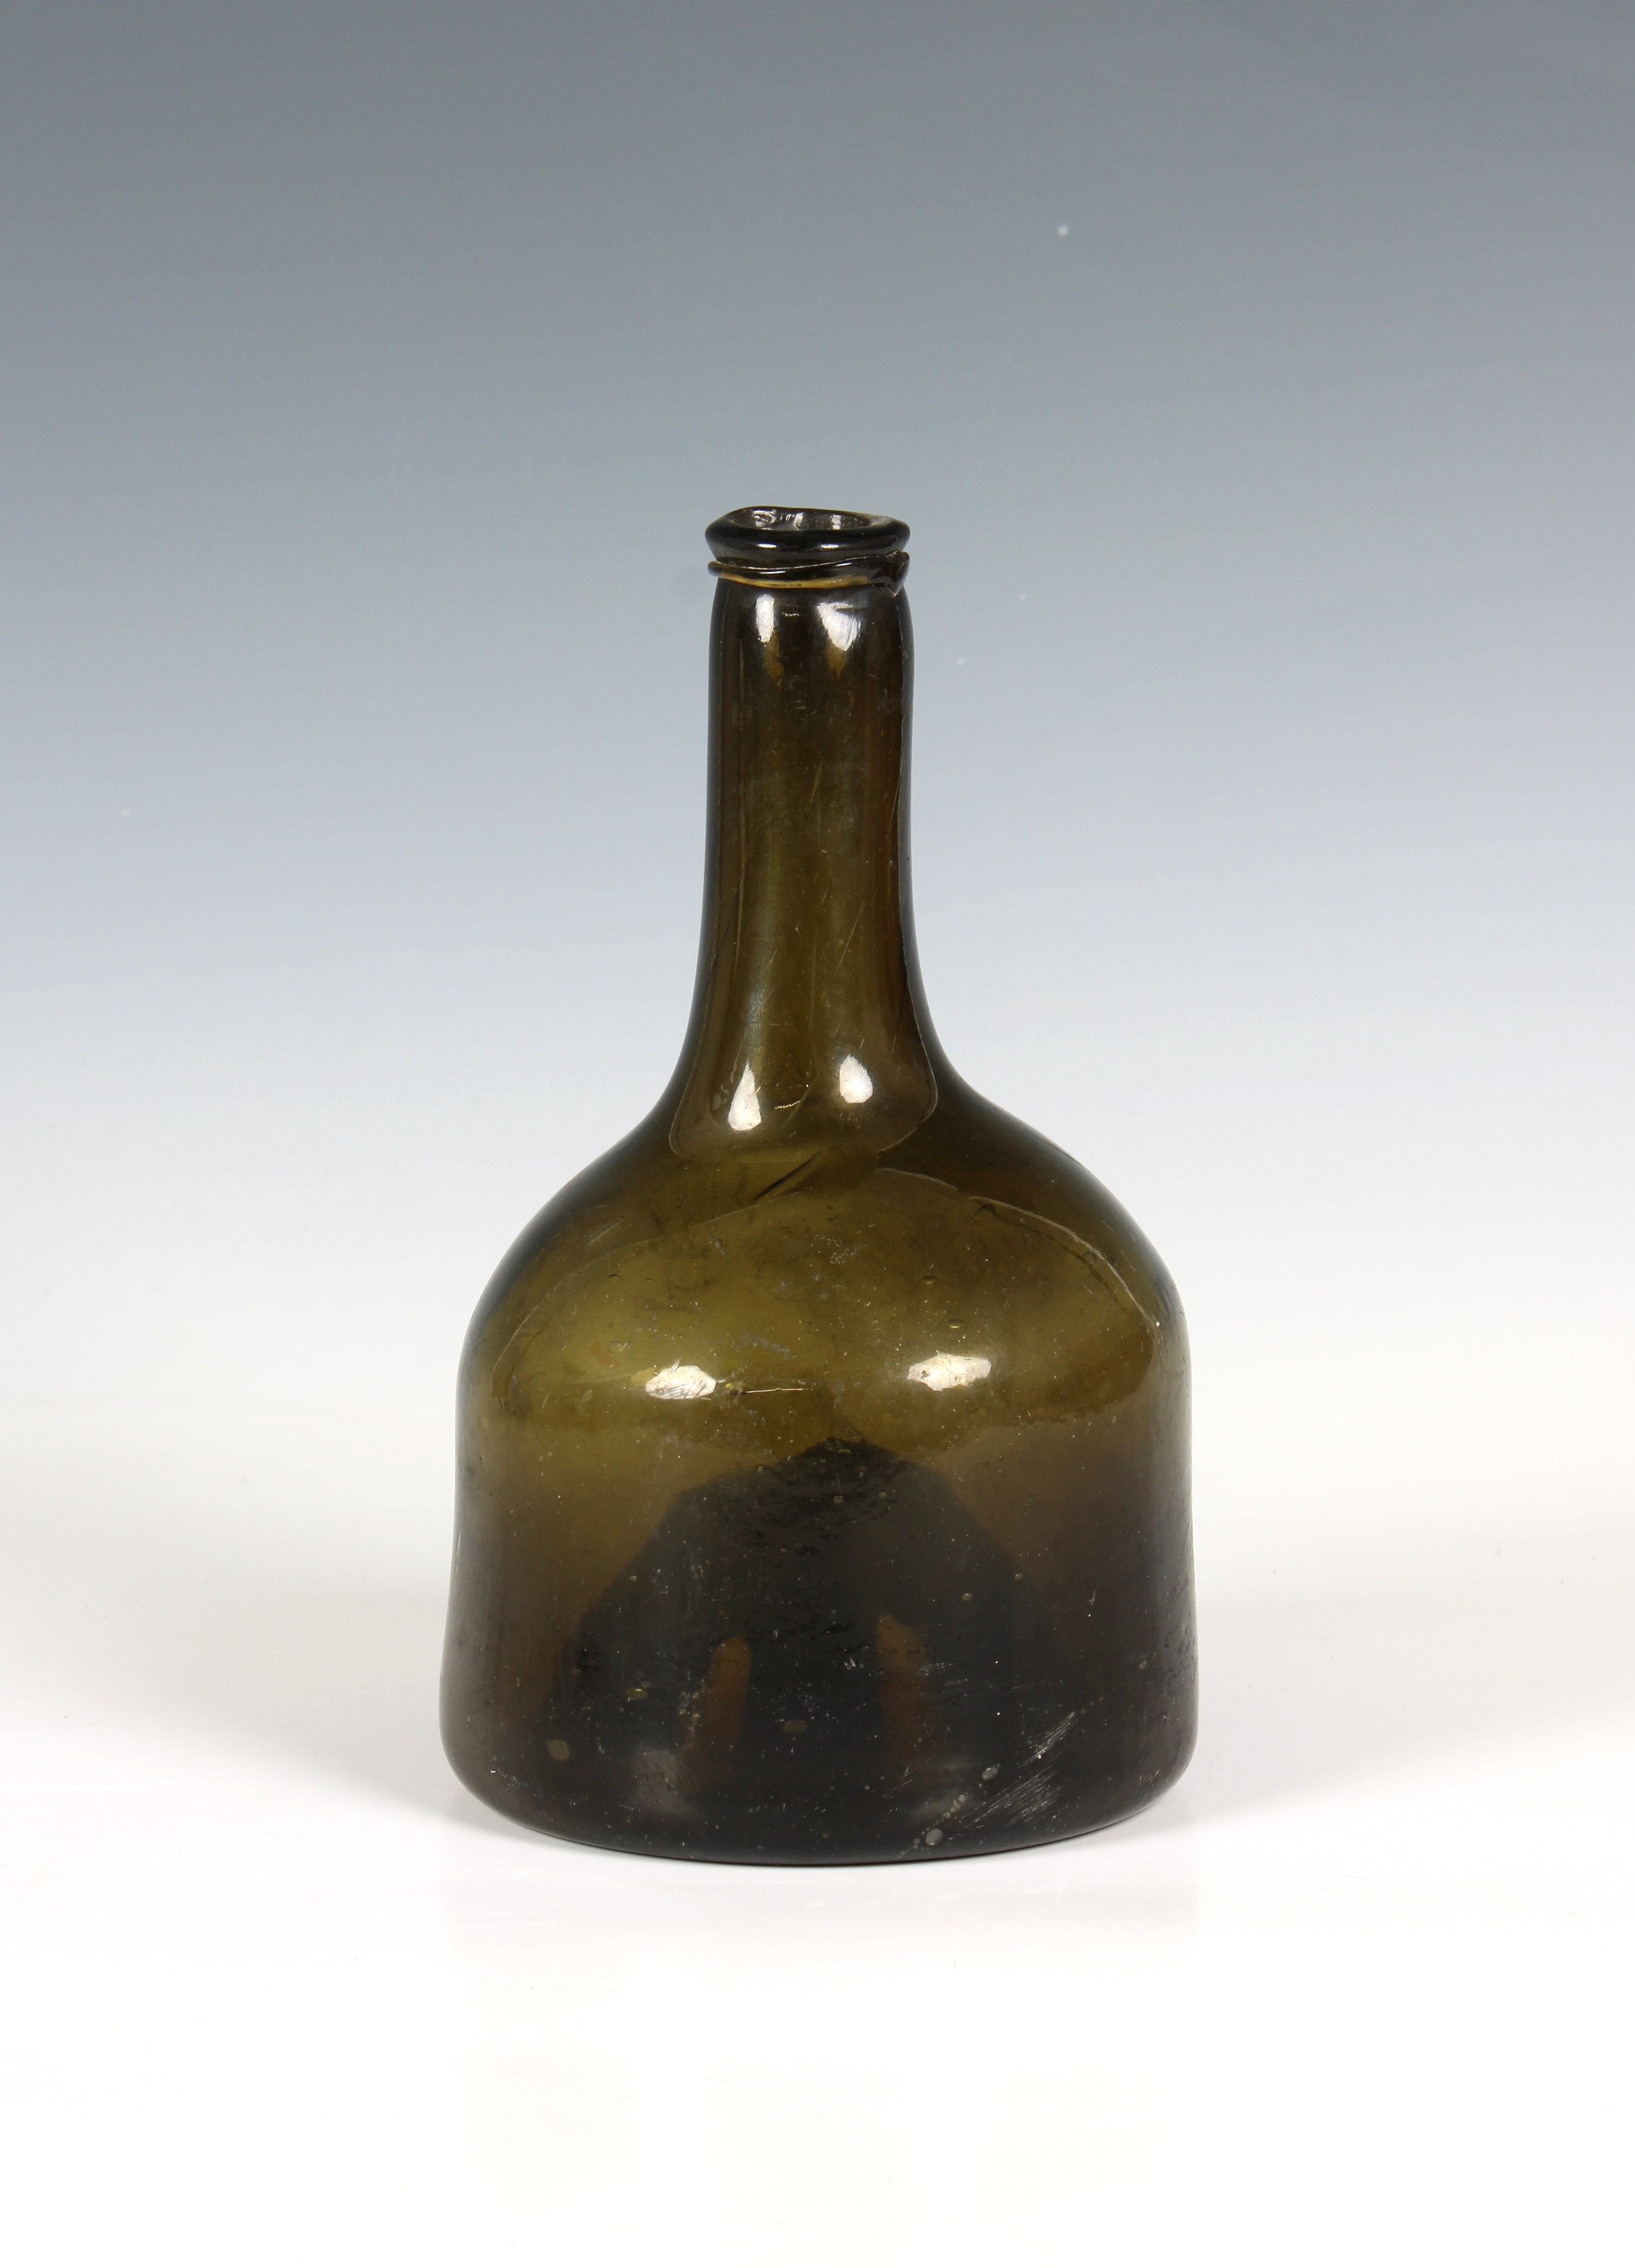 A green glass wine bottle of mallet form with trailed string rim probably mid 18th century, dark